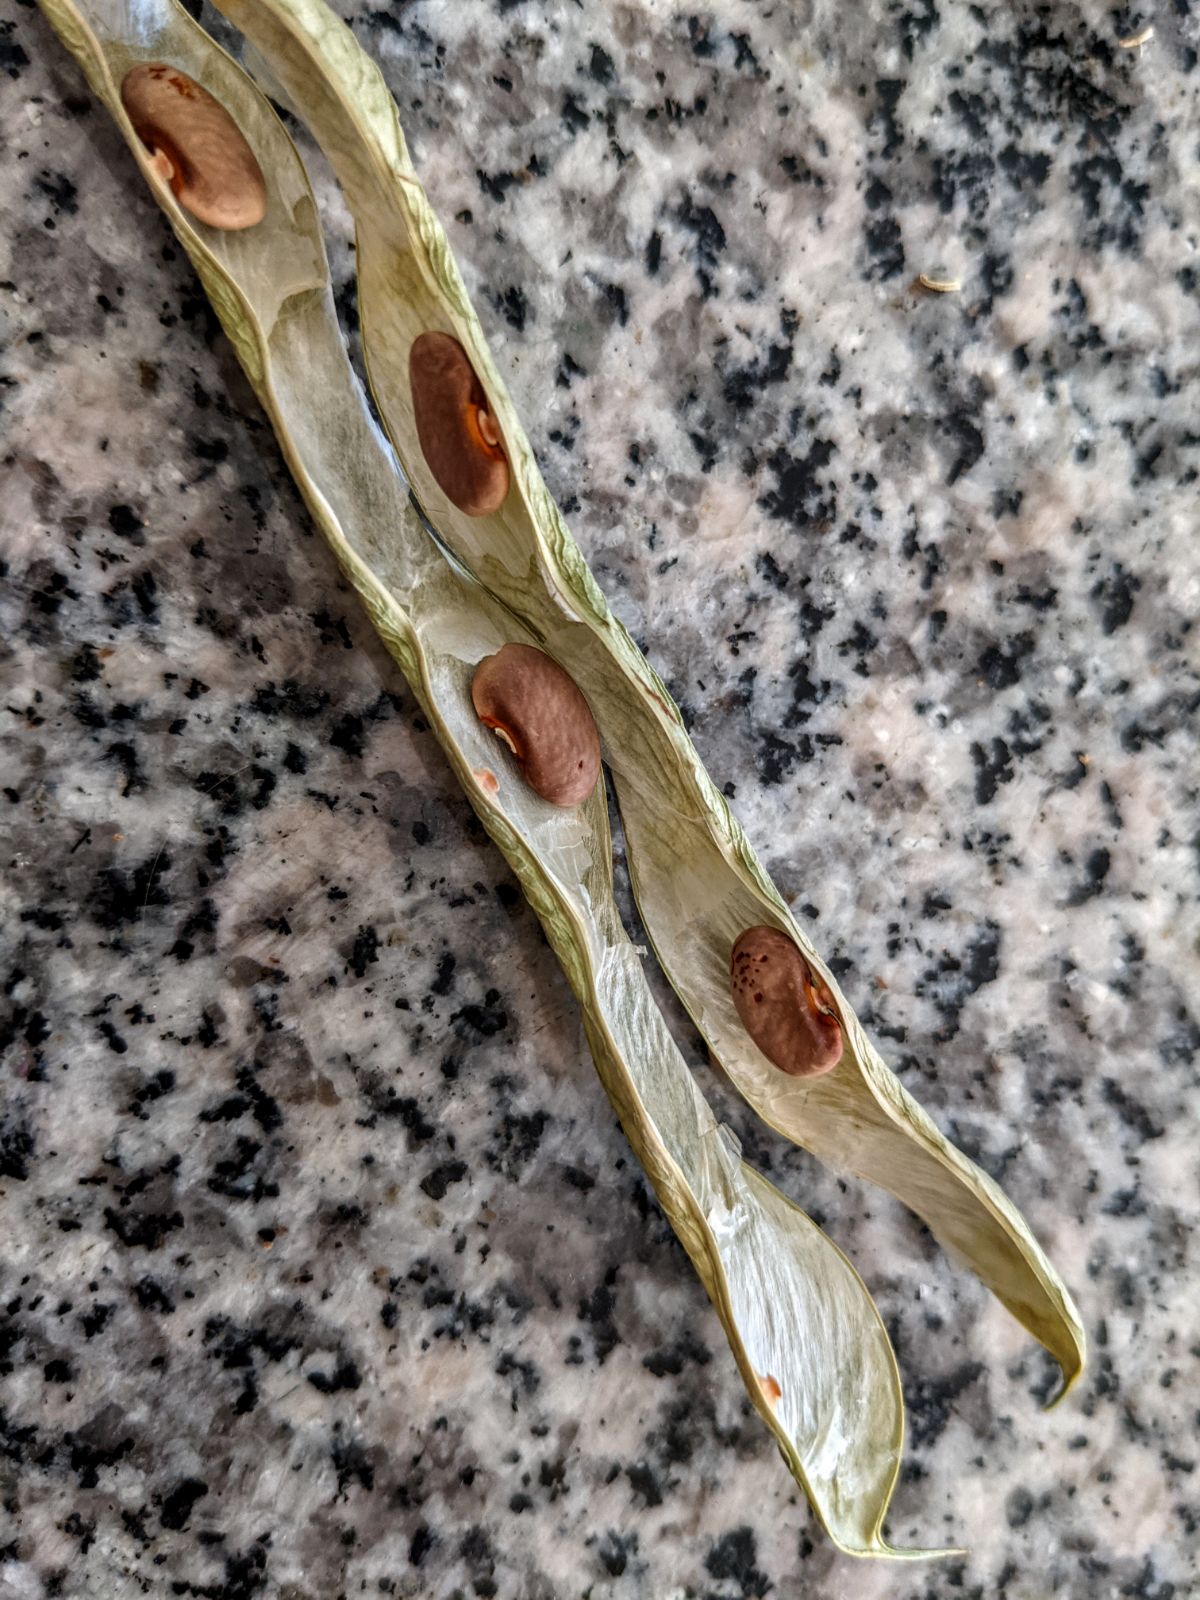 Opened green bean seed pod on a granite table